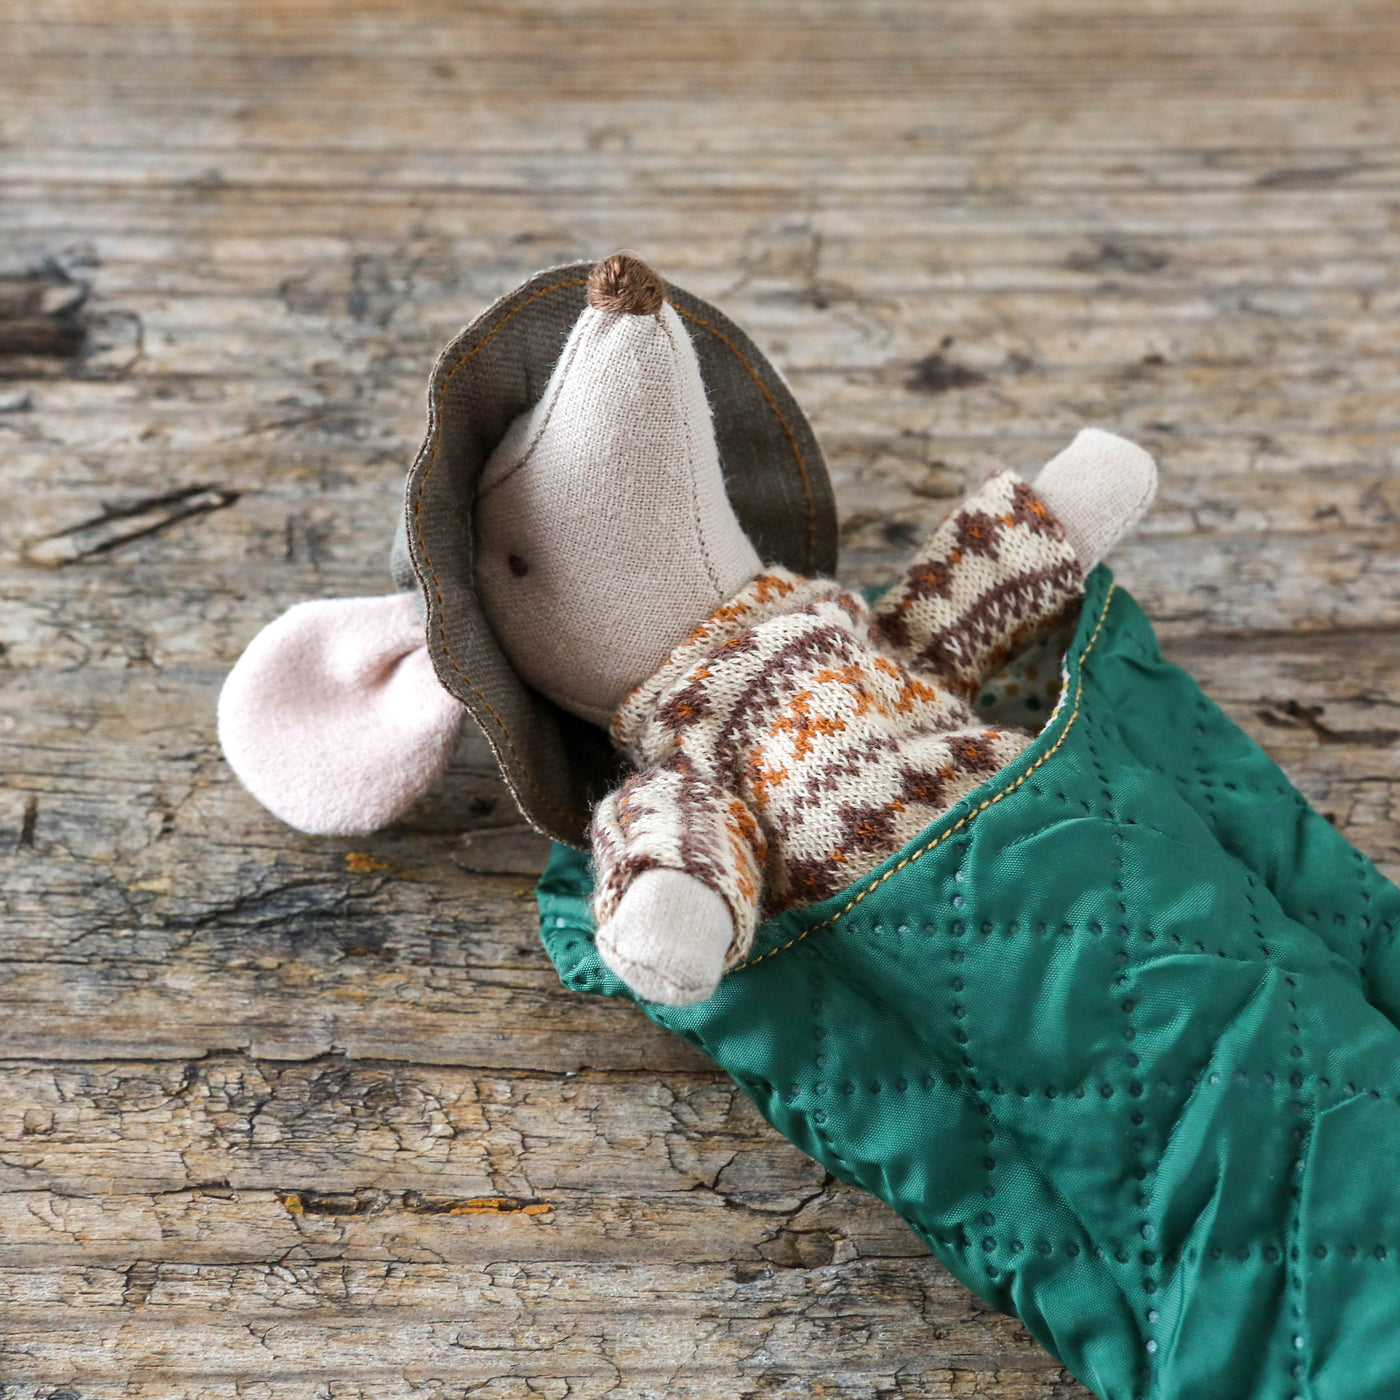 NEW! Hiker Mouse - Big Brother with Sleeping Bag